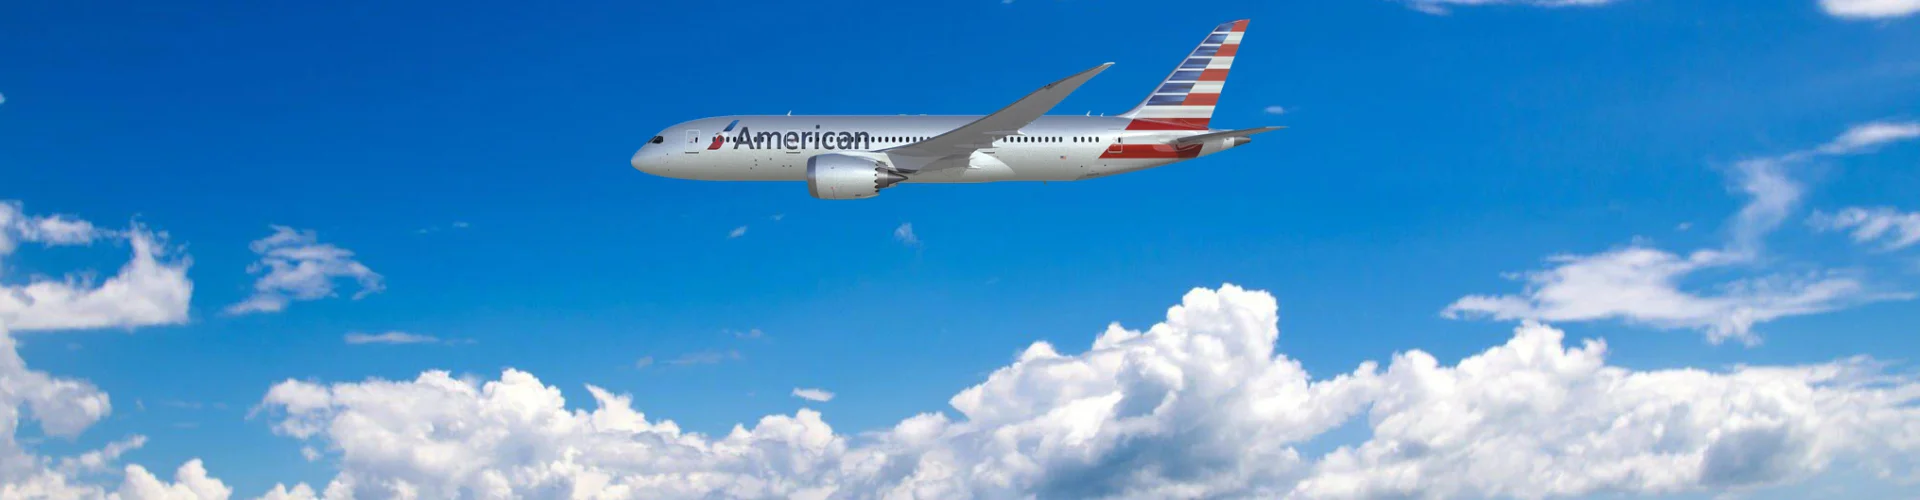 americand airlines